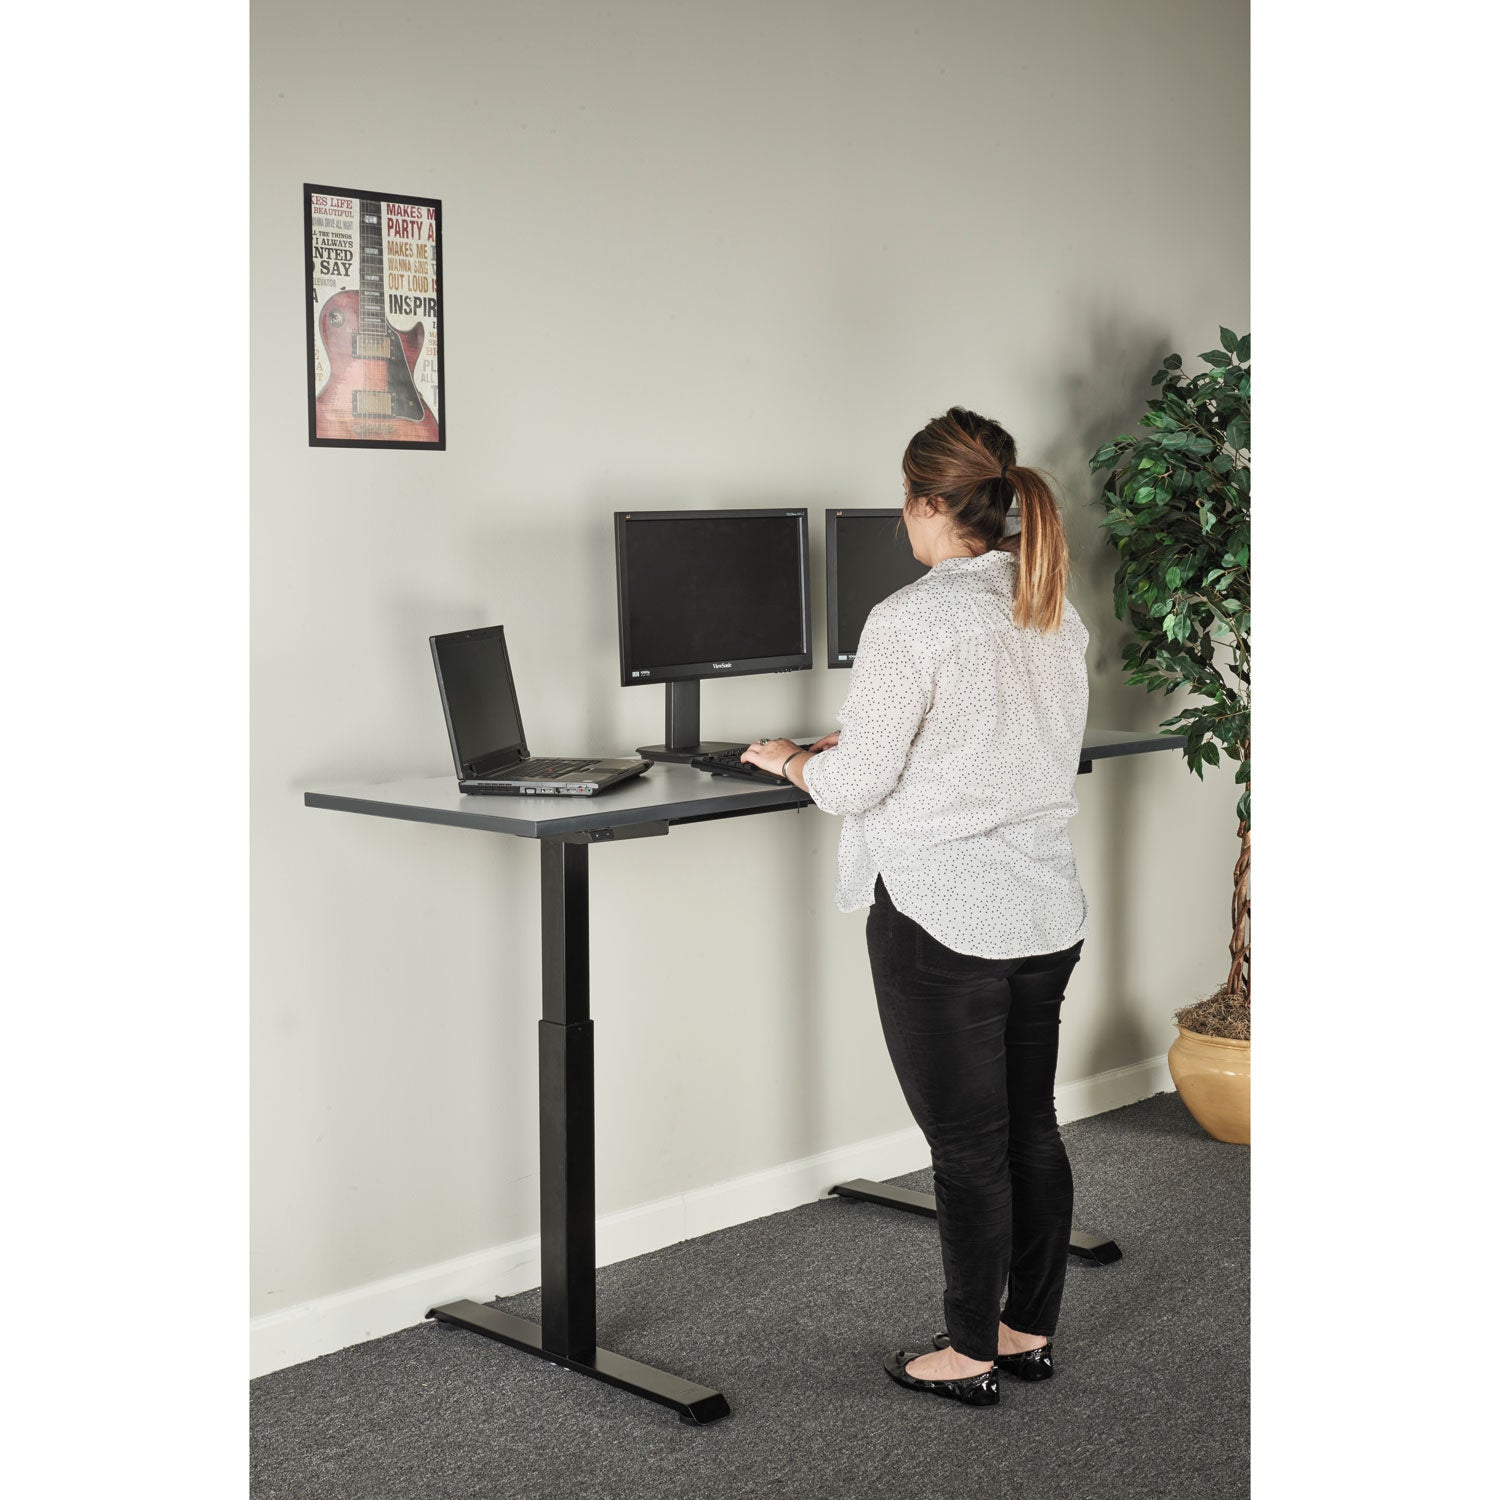 adaptivergo-sit-stand-two-stage-electric-height-adjustable-table-base-4806-x-2435-x-275-to-472-black_aleht2ssb - 7